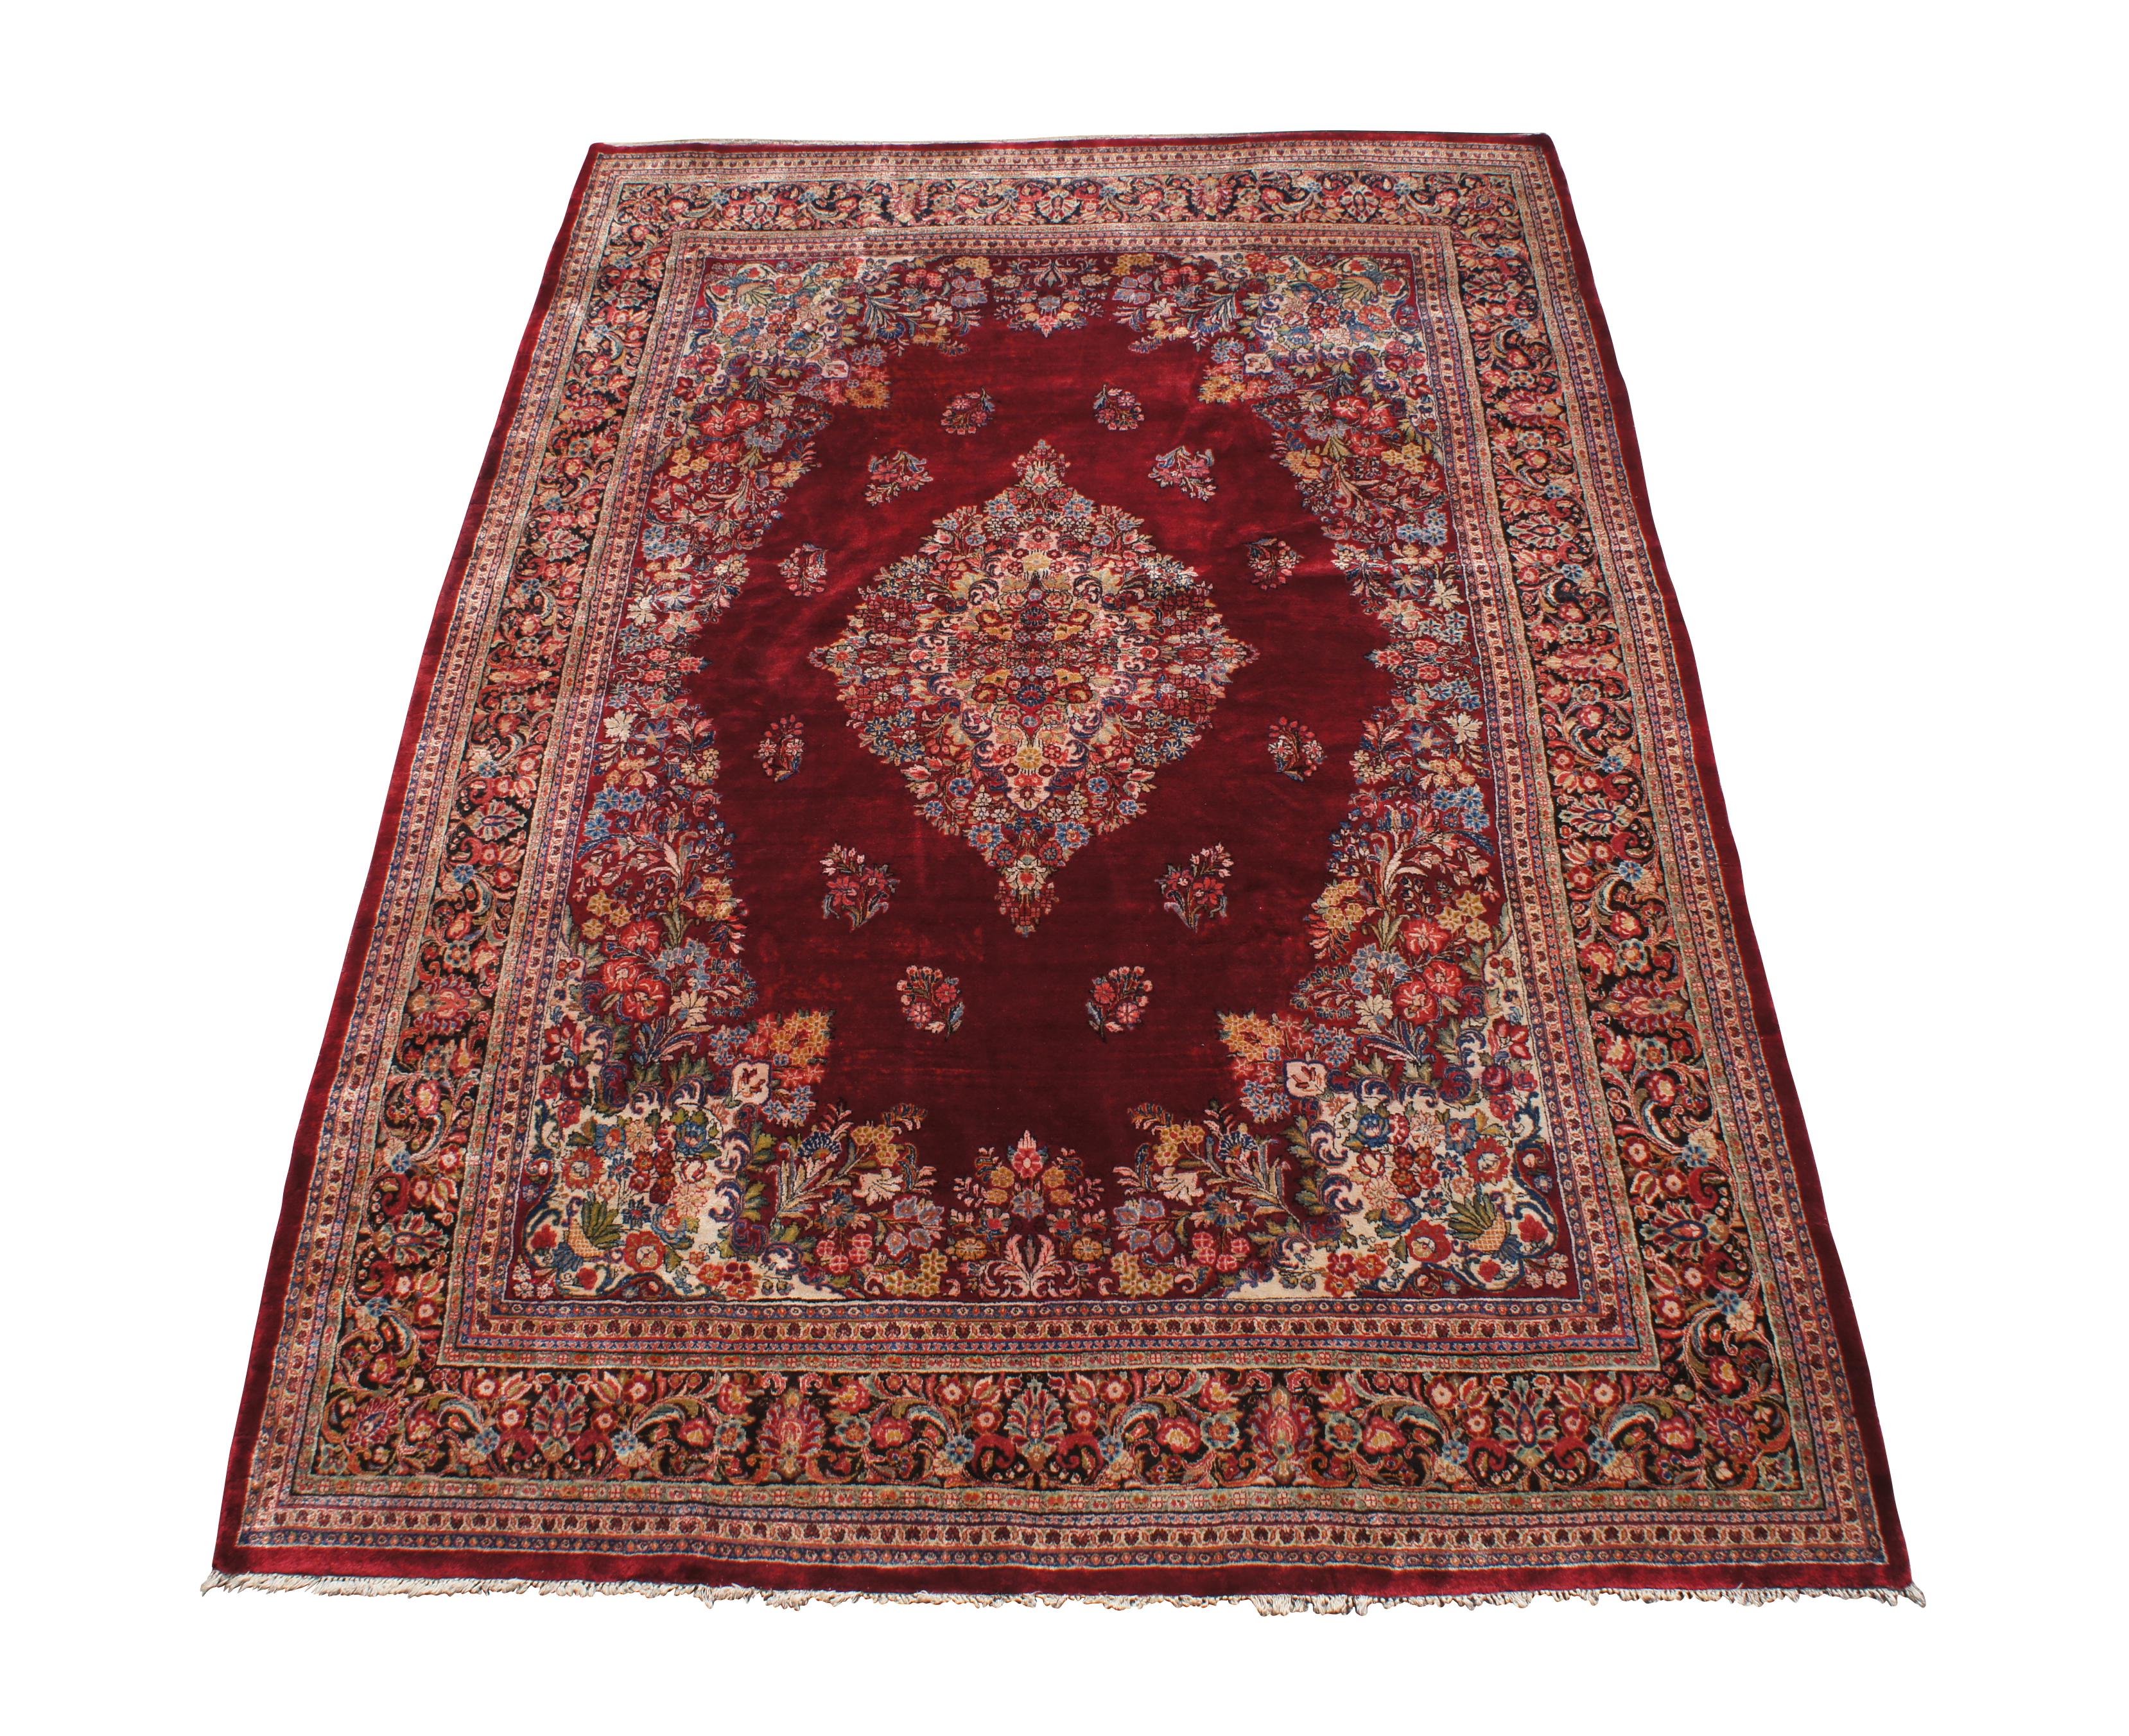 Indo-Tabriz area rugs are hand-knotted rugs with traditional designs and rich color palettes. They are known for their quality, durability, and diverse patterns. This stunning carpet was handmade in India from silk and wool with a vibrant medallion